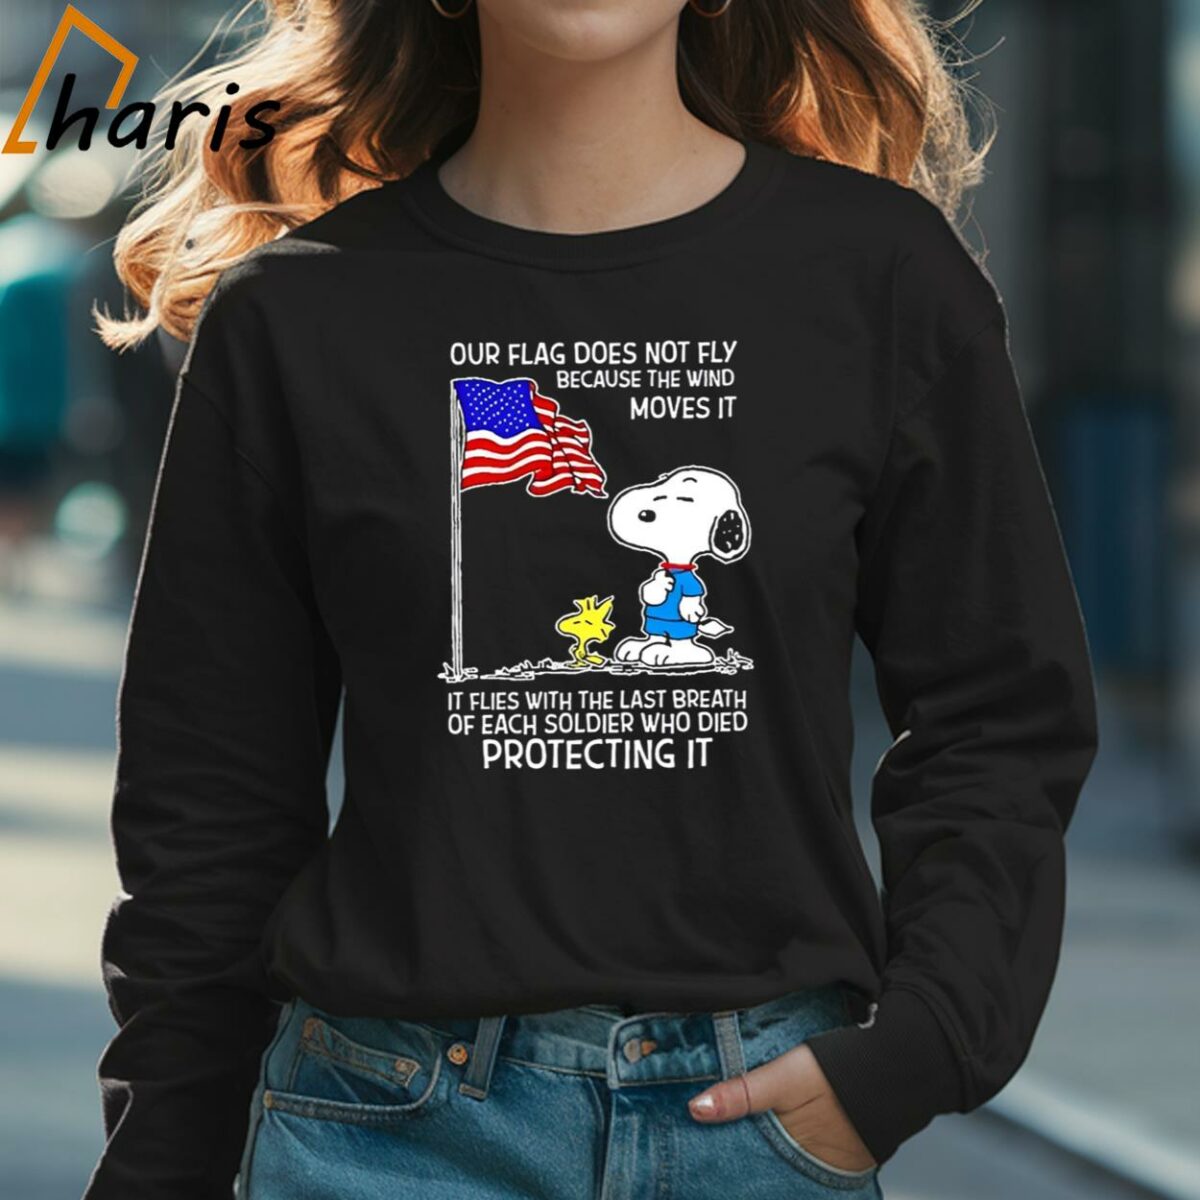 Snoopy And Woodstock Salute The American Flag Shirt 3 Long sleeve shirt